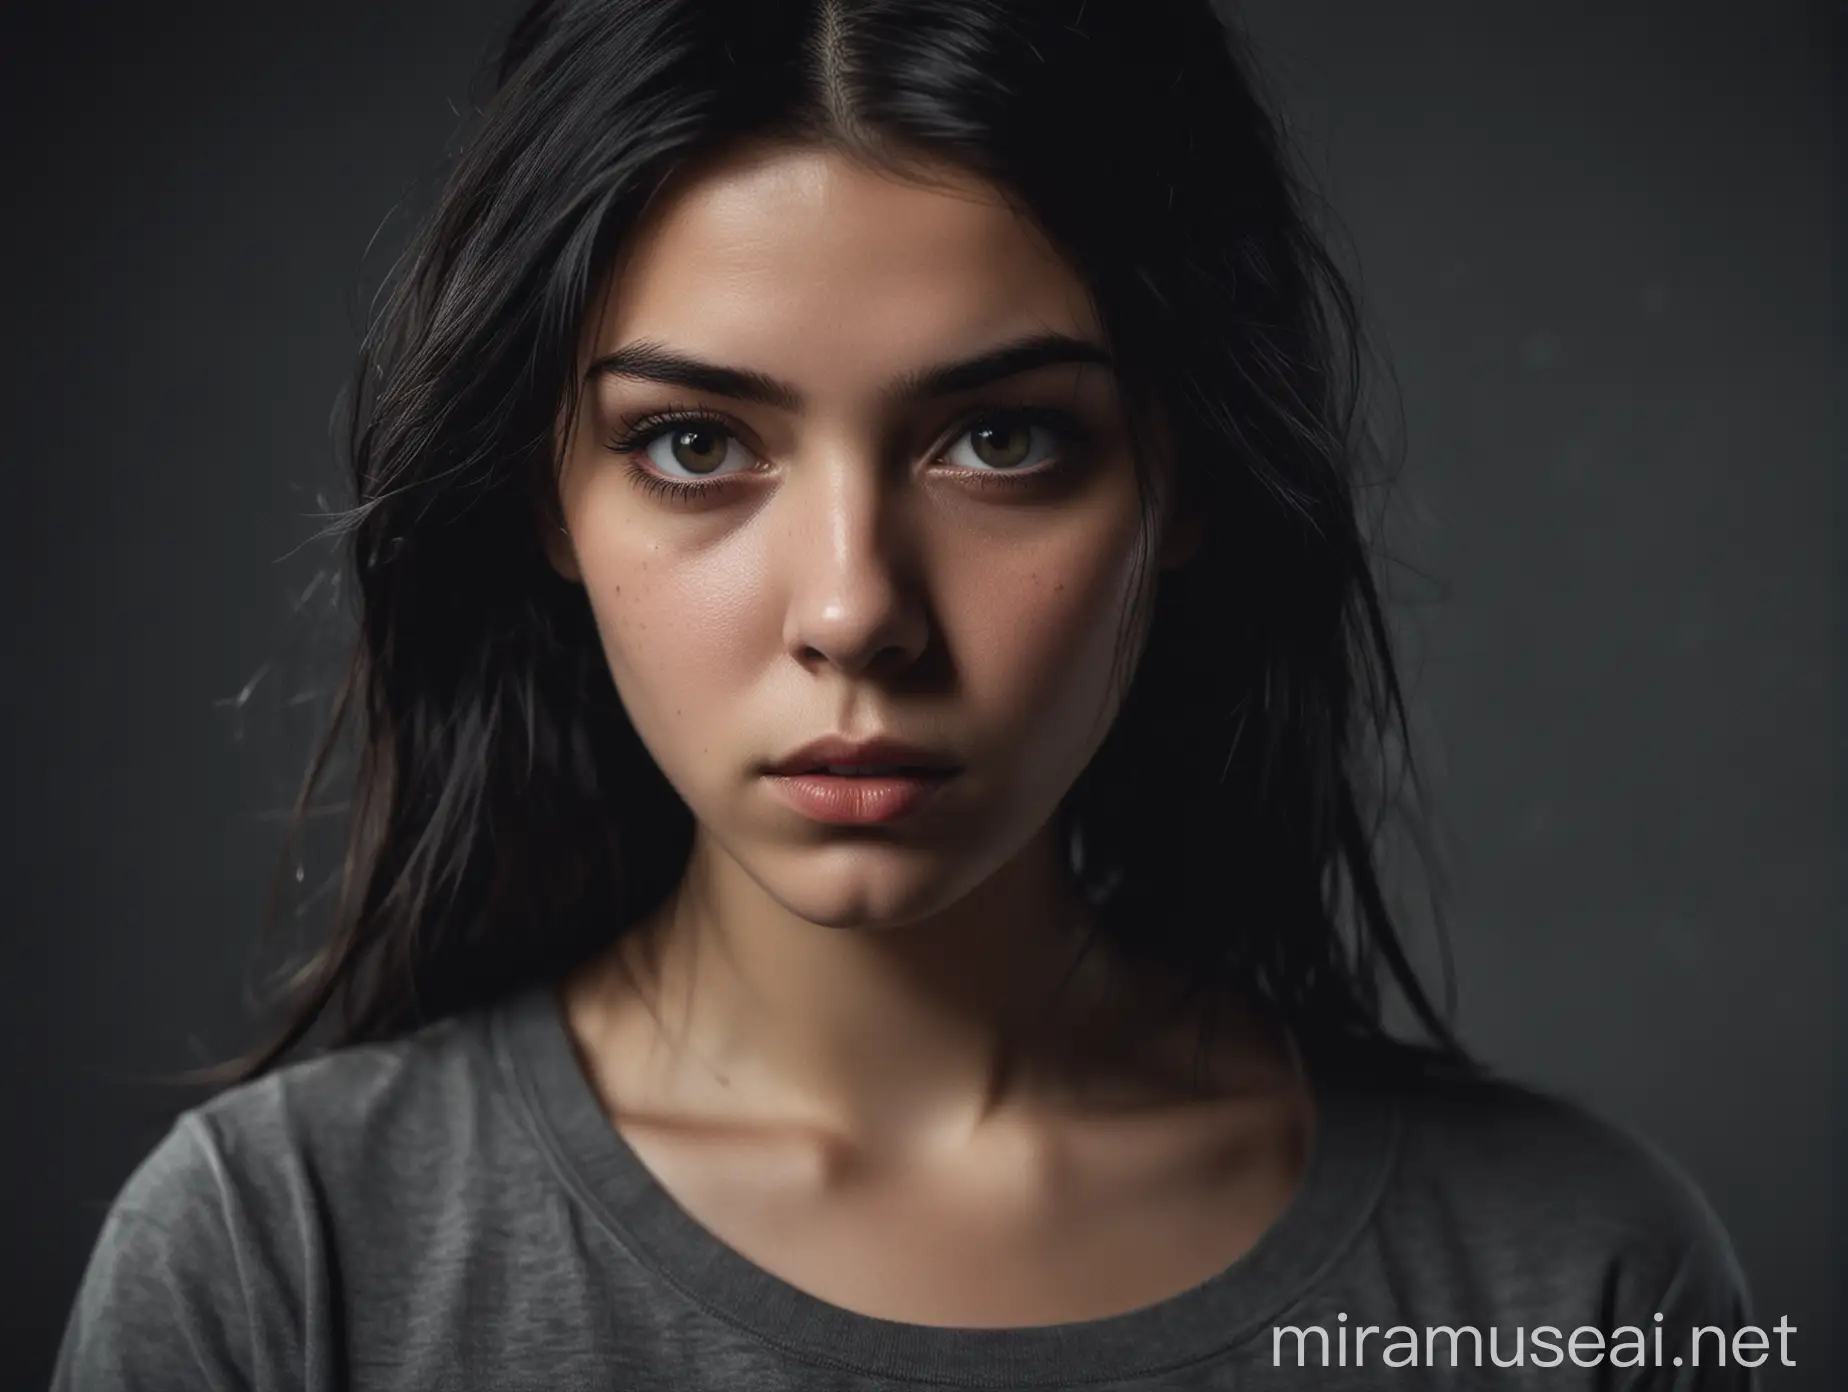 Portrait of a Serious Girl with Dark Hair in Cinematic Style